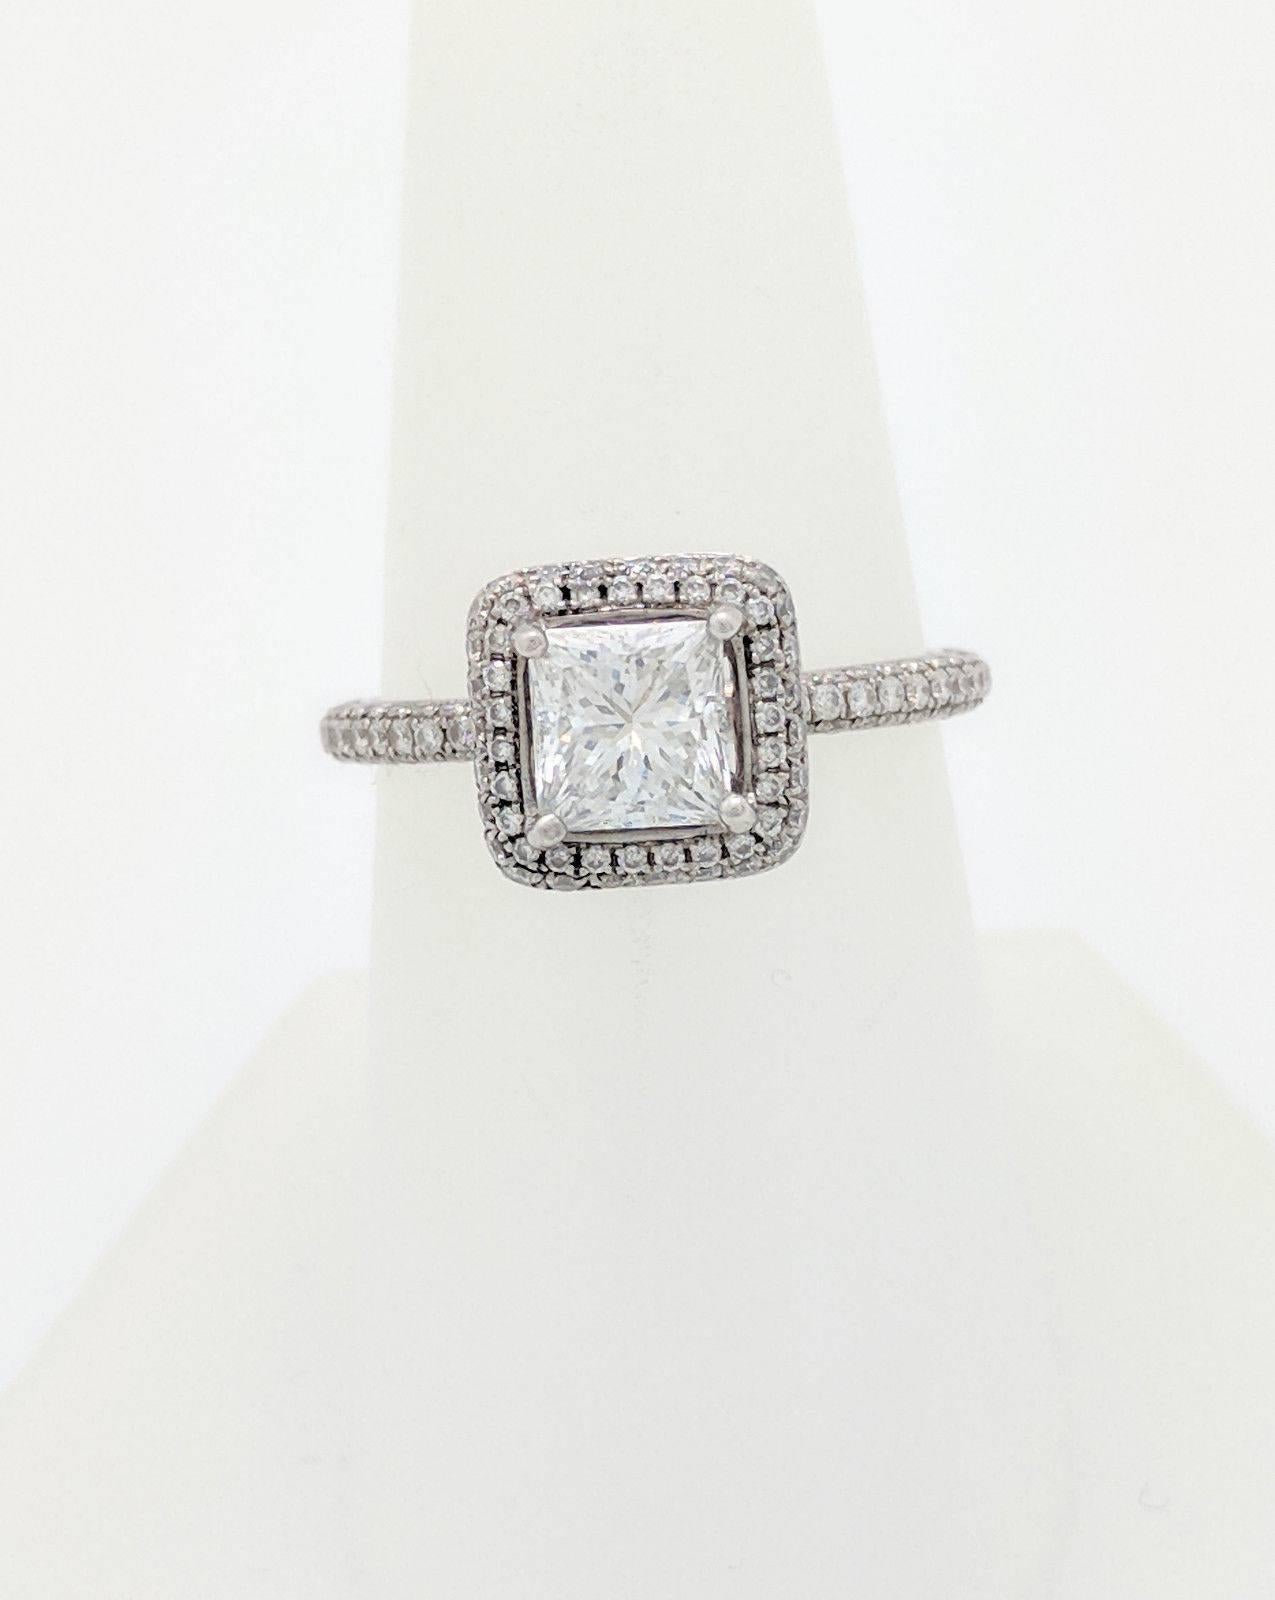  1.06ct. Princess Cut Natural Diamond Halo Engagement Ring GIA Certified VVS2/E

You are viewing a stunning 1.06ct. natural princess cut diamond. This diamond is certified by GIA Gemological Institute of America and has been graded as VVS2 in